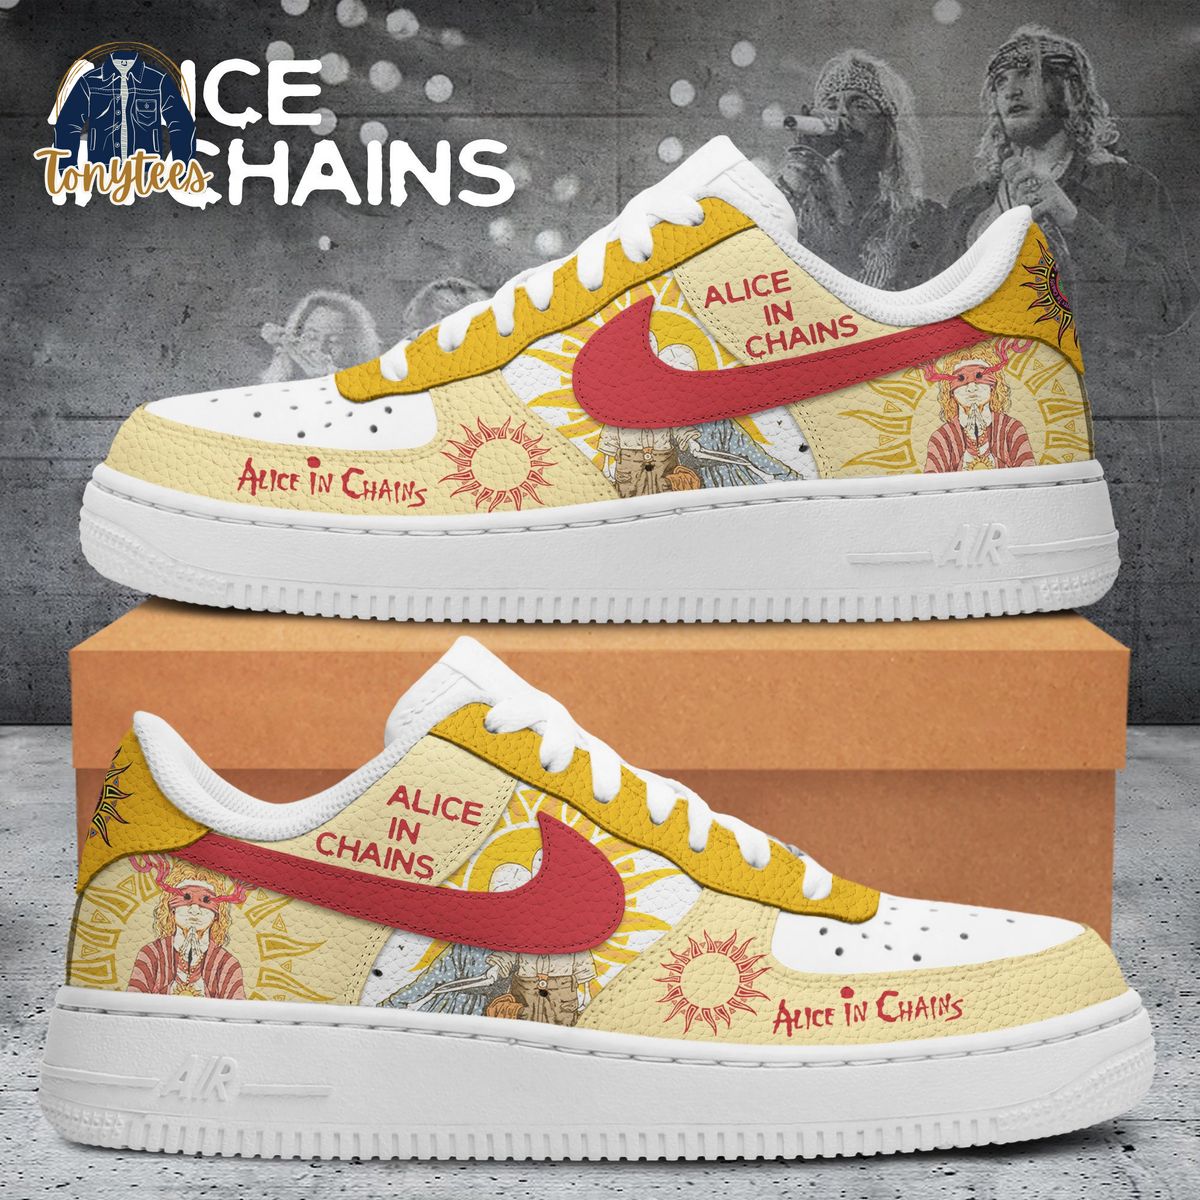 Alice In Chains sunshine air force 1 sneaker